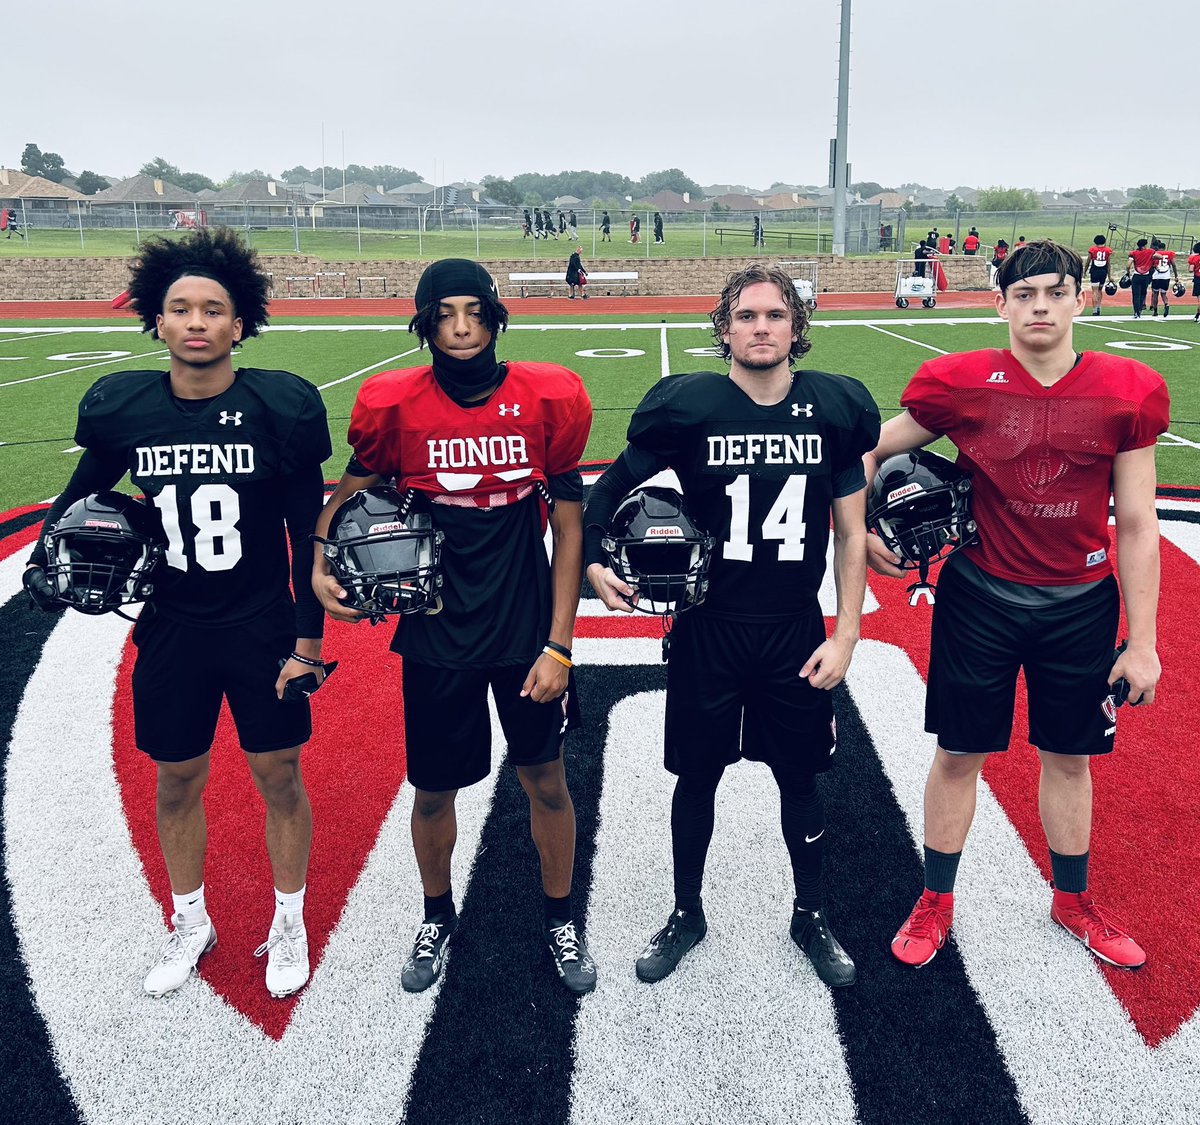 EARNED! Proud of these 4 young men for earning their way into the Varsity locker room for their collective work in the classroom, during off season, their own time, extra time and Week 1 of Spring football practices! @KilleenISD_ #RepTheShield 🛡️ #HonorHeights ⚔️